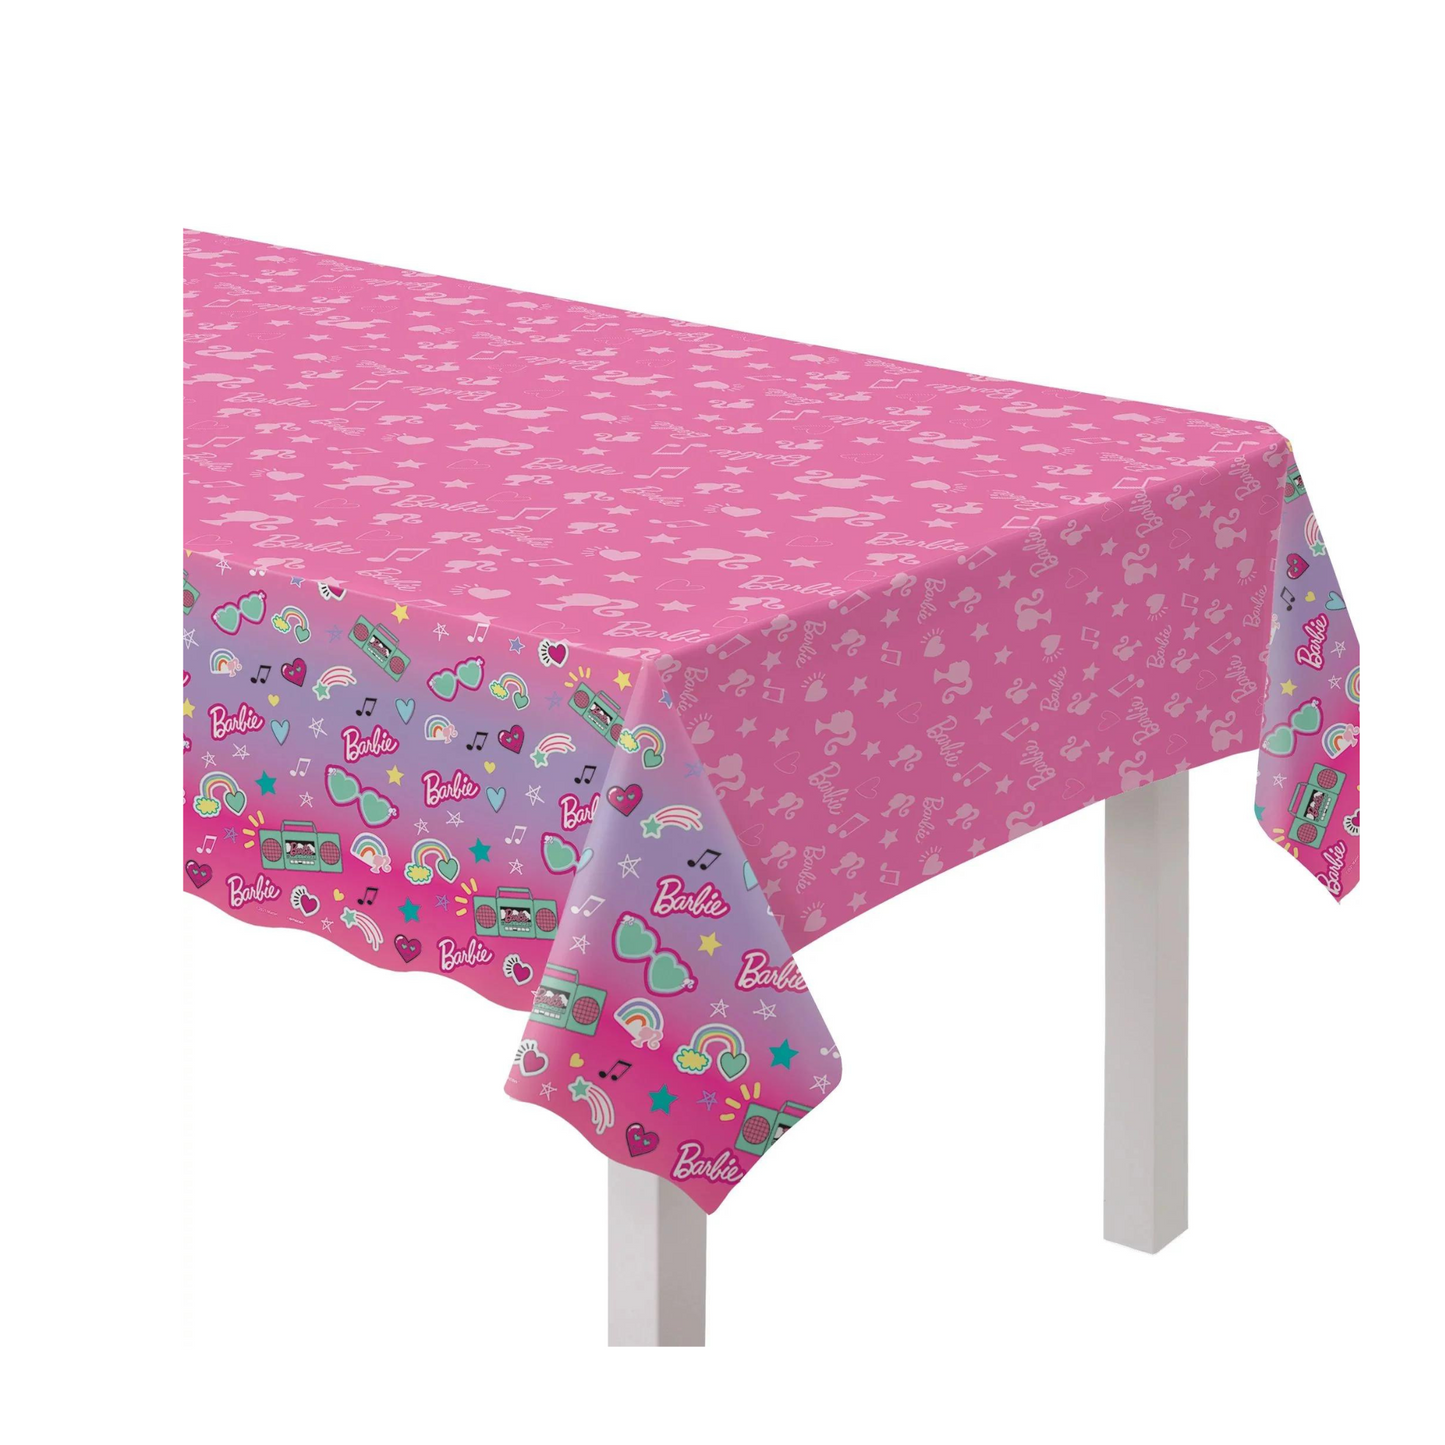 Barbie Dream Together Pink Rectangular Plastic Table Cover